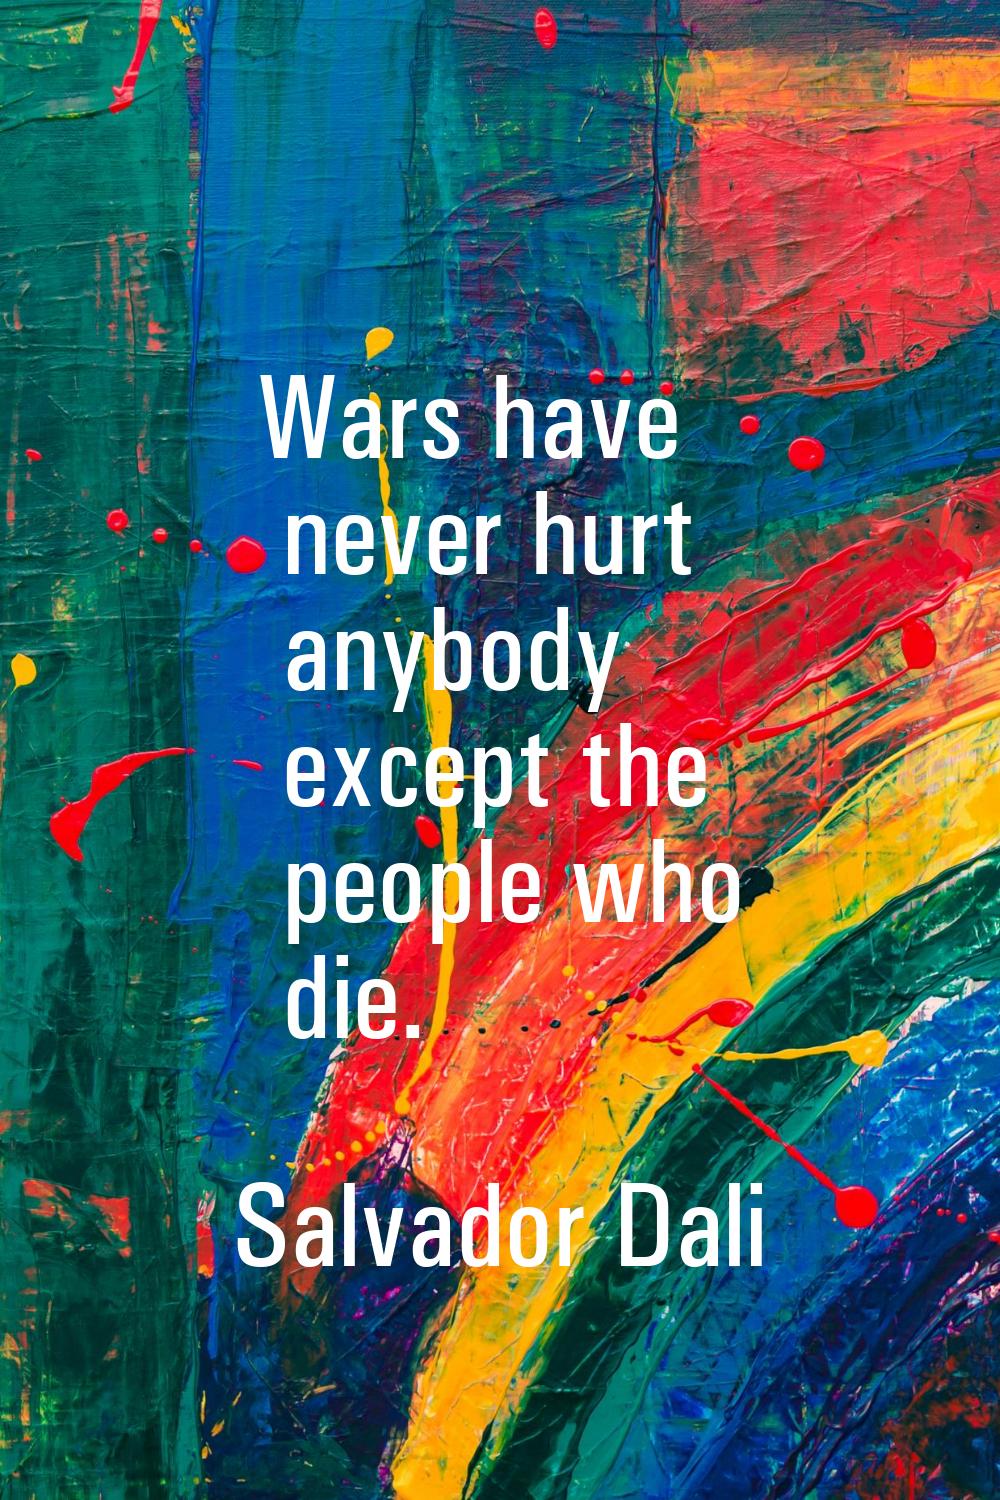 Wars have never hurt anybody except the people who die.